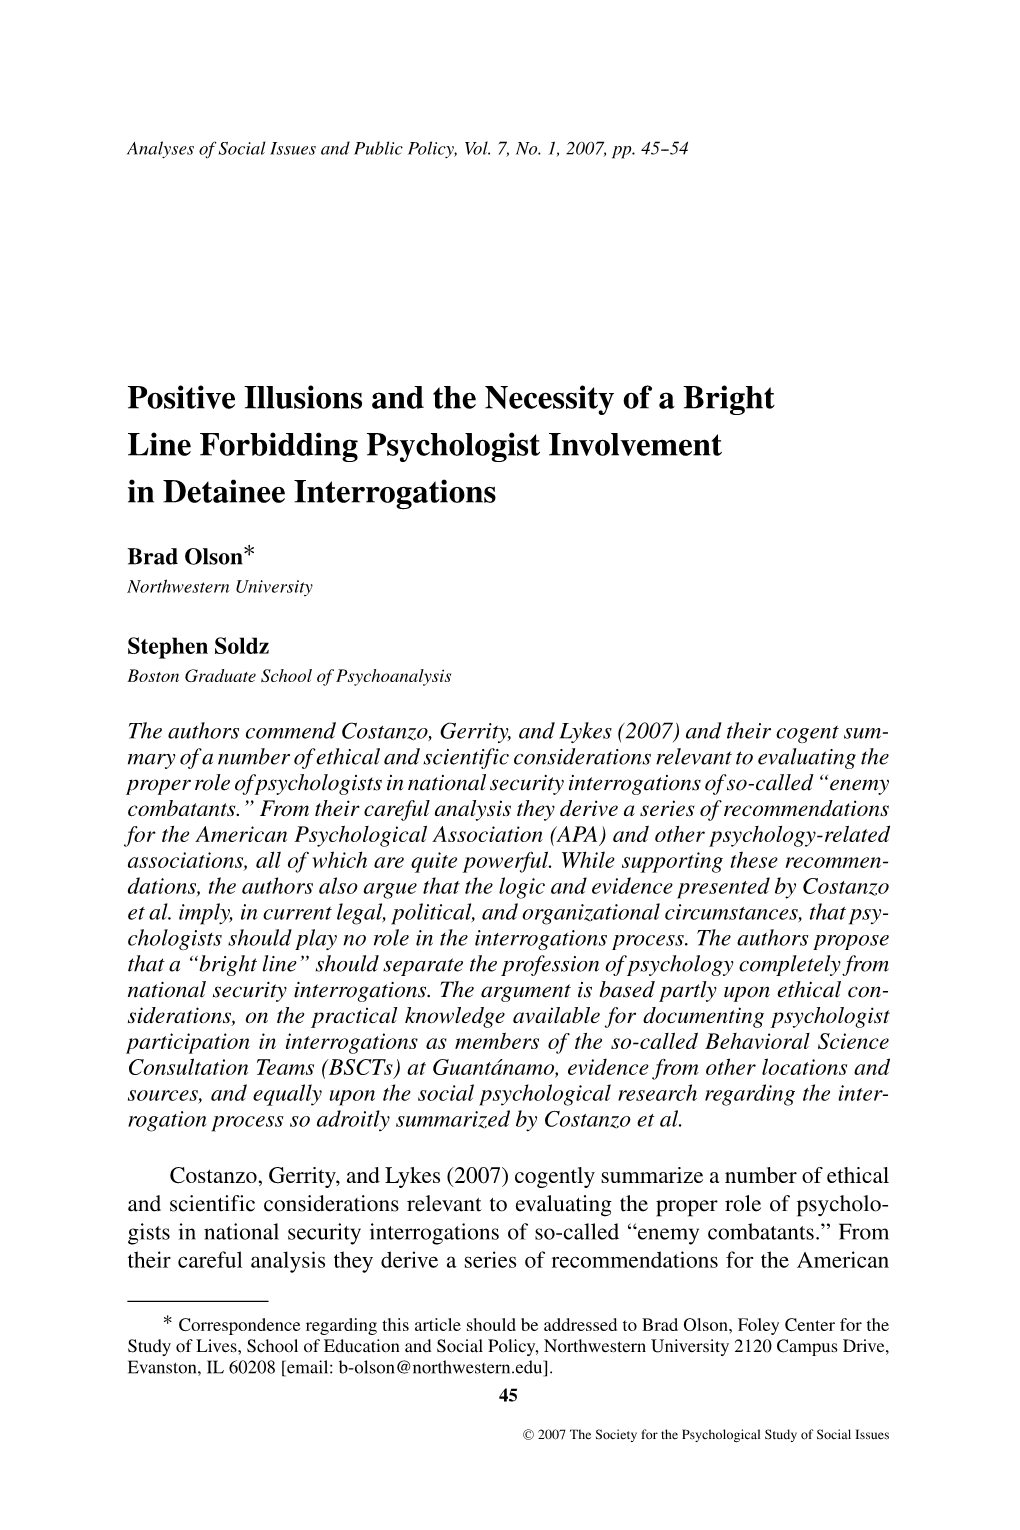 Positive Illusions and the Necessity of a Bright Line Forbidding Psychologist Involvement in Detainee Interrogations ∗ Brad Olson Northwestern University